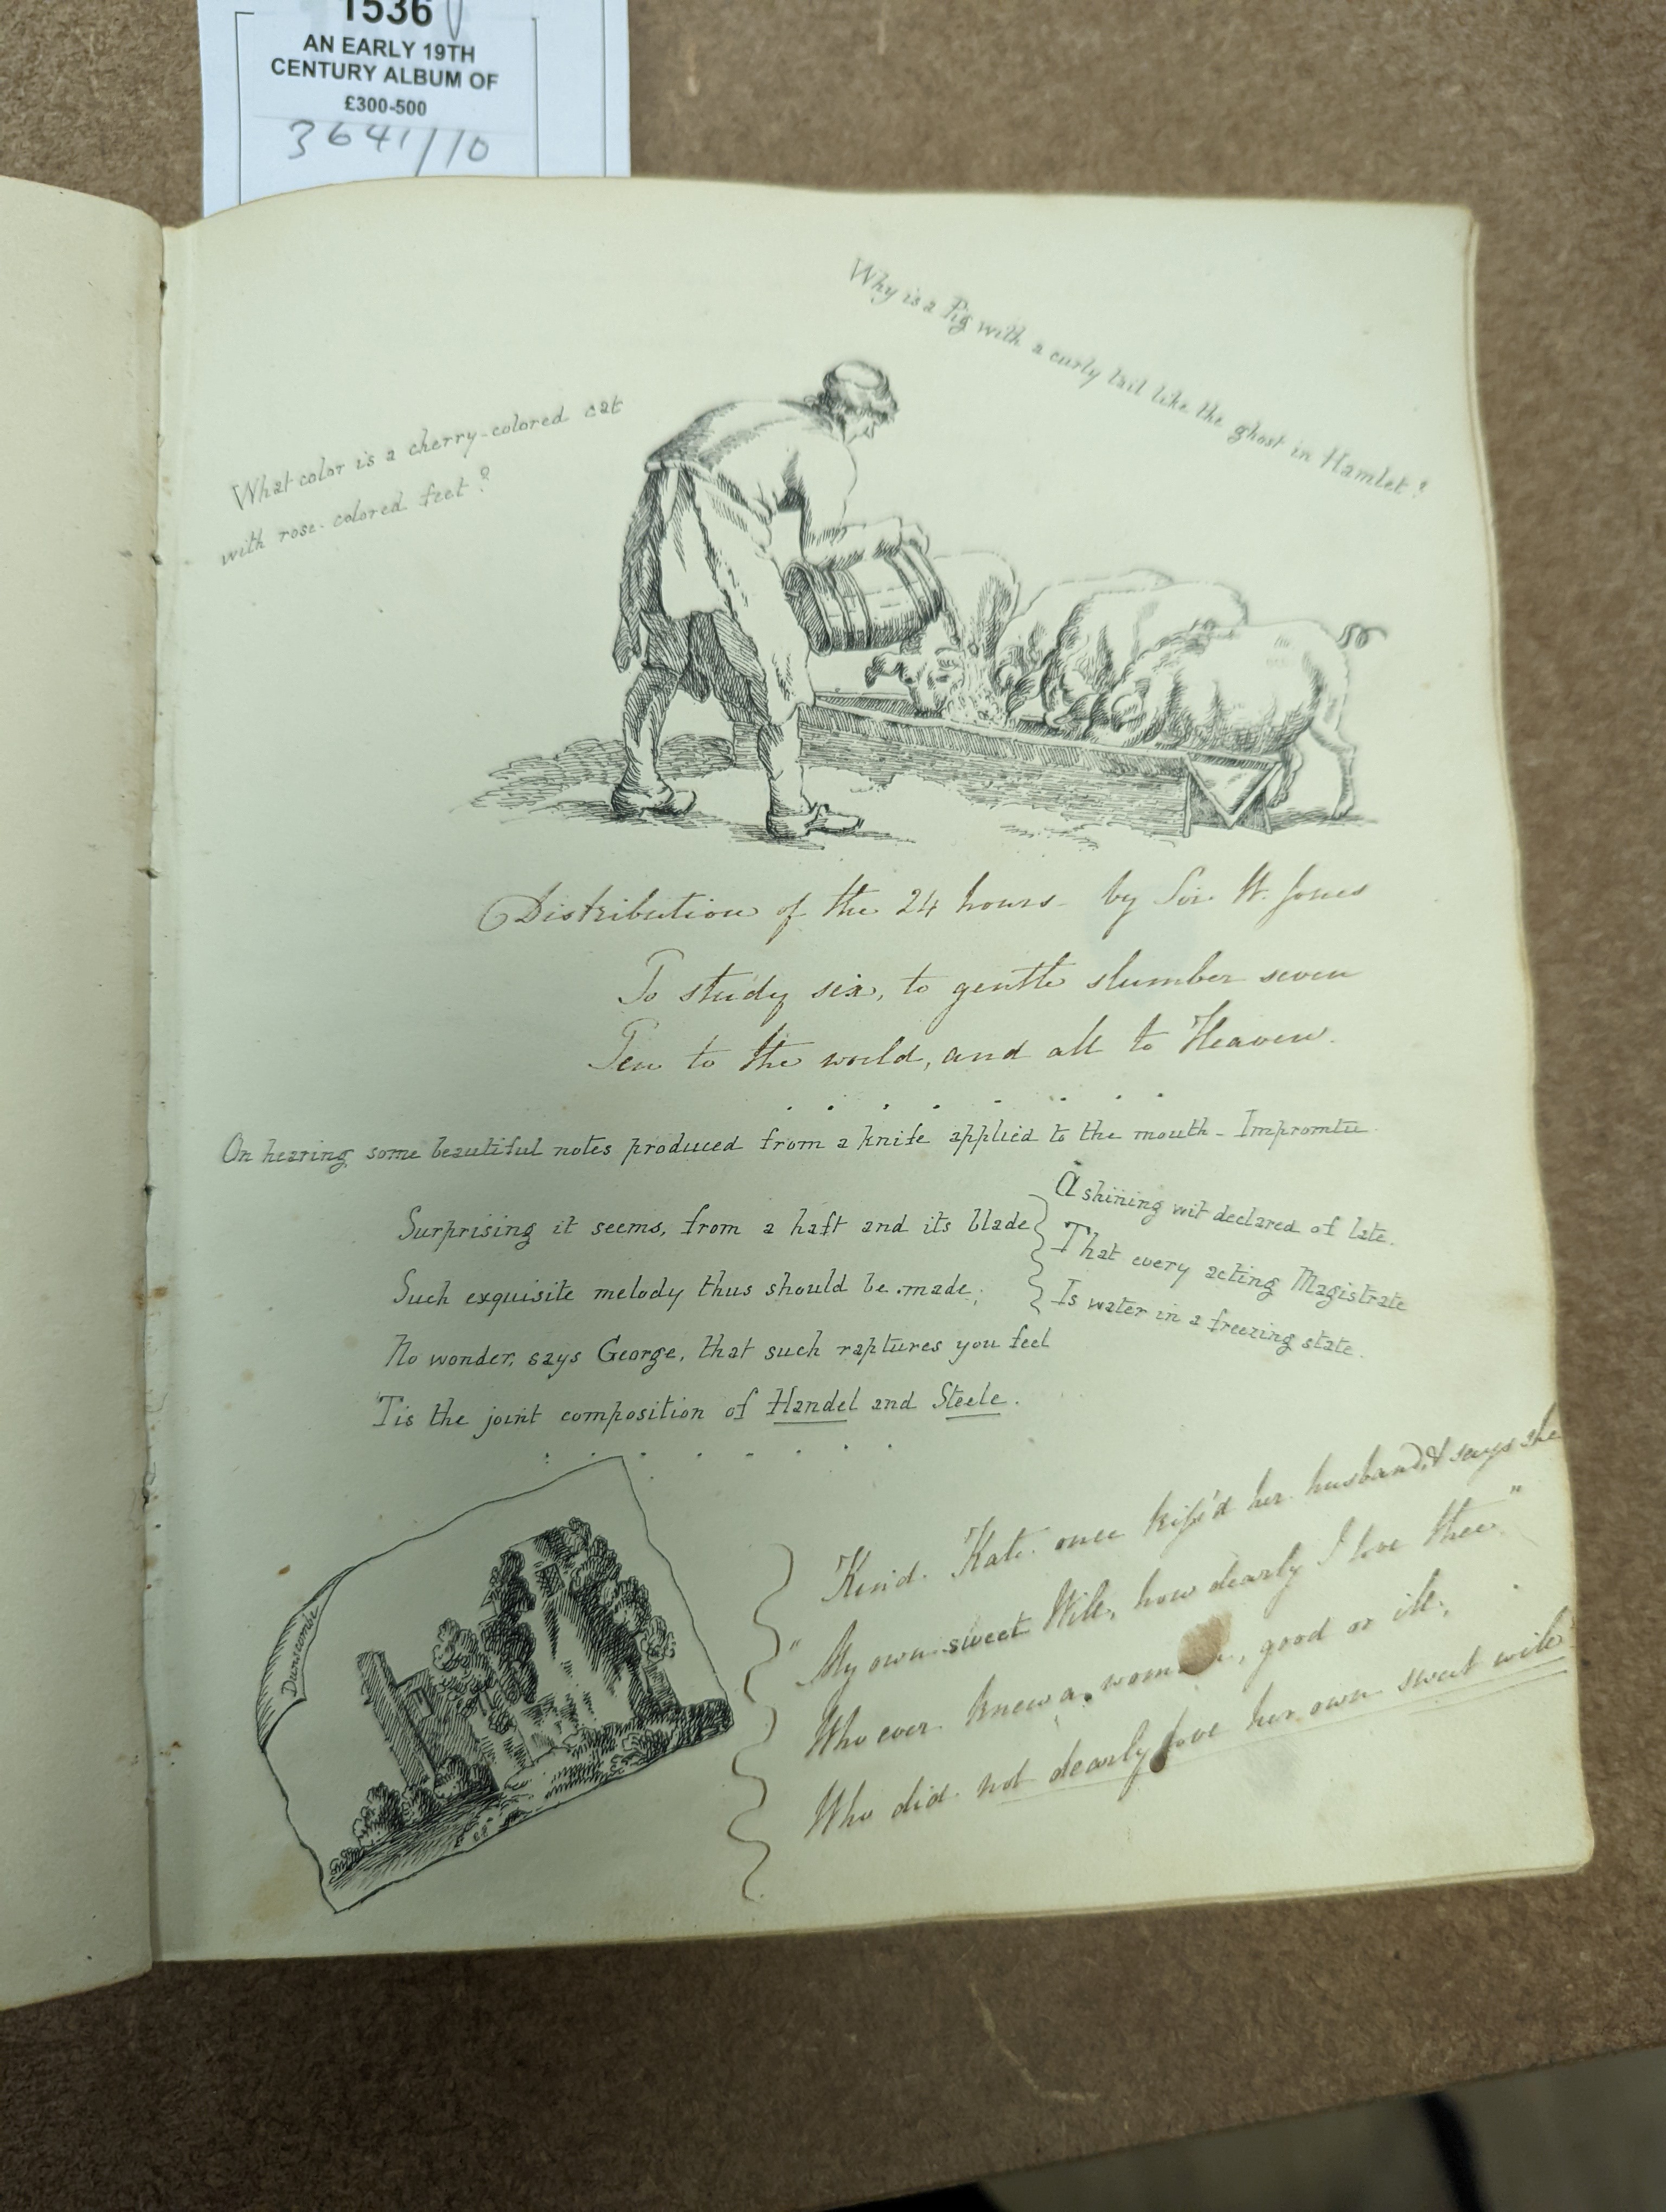 An early 19th century album of 152 watercolours, and pencil and ink drawings, including natural history still life subjects, land and seascapes and vignettes, many with accompanying verse and prose, by approximately 30 d